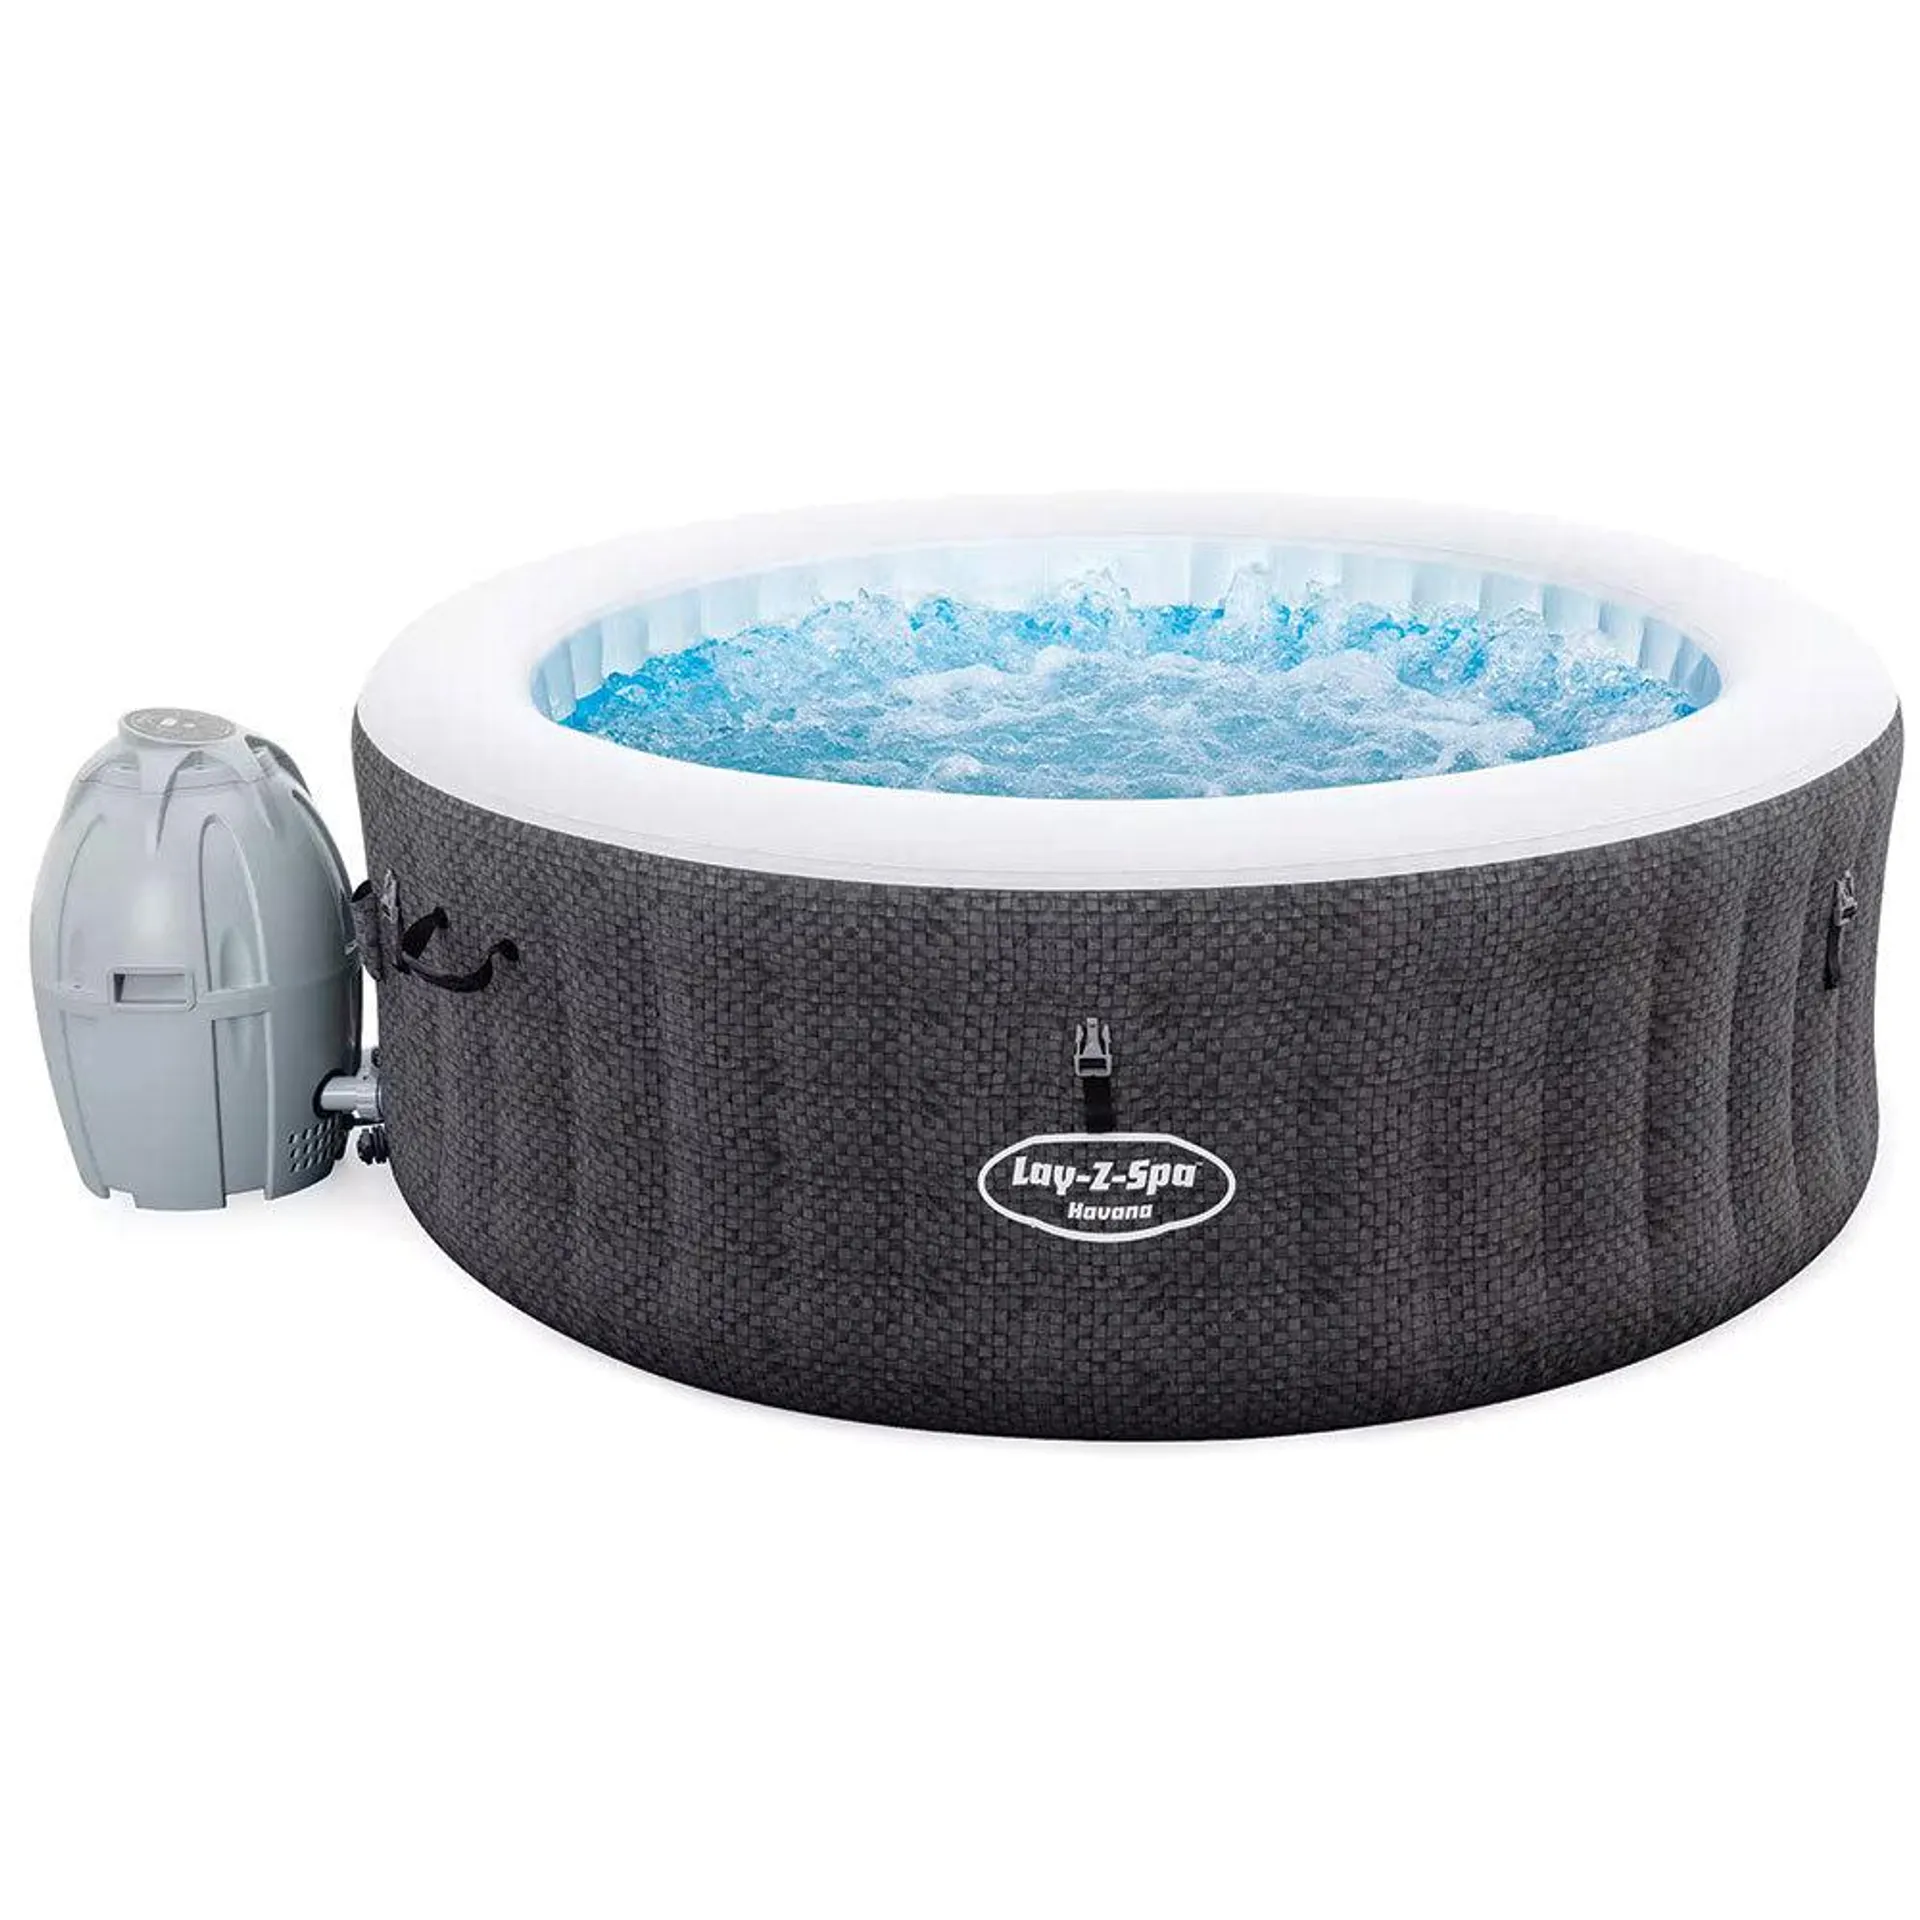 Inflatable Lay-Z-Spa H